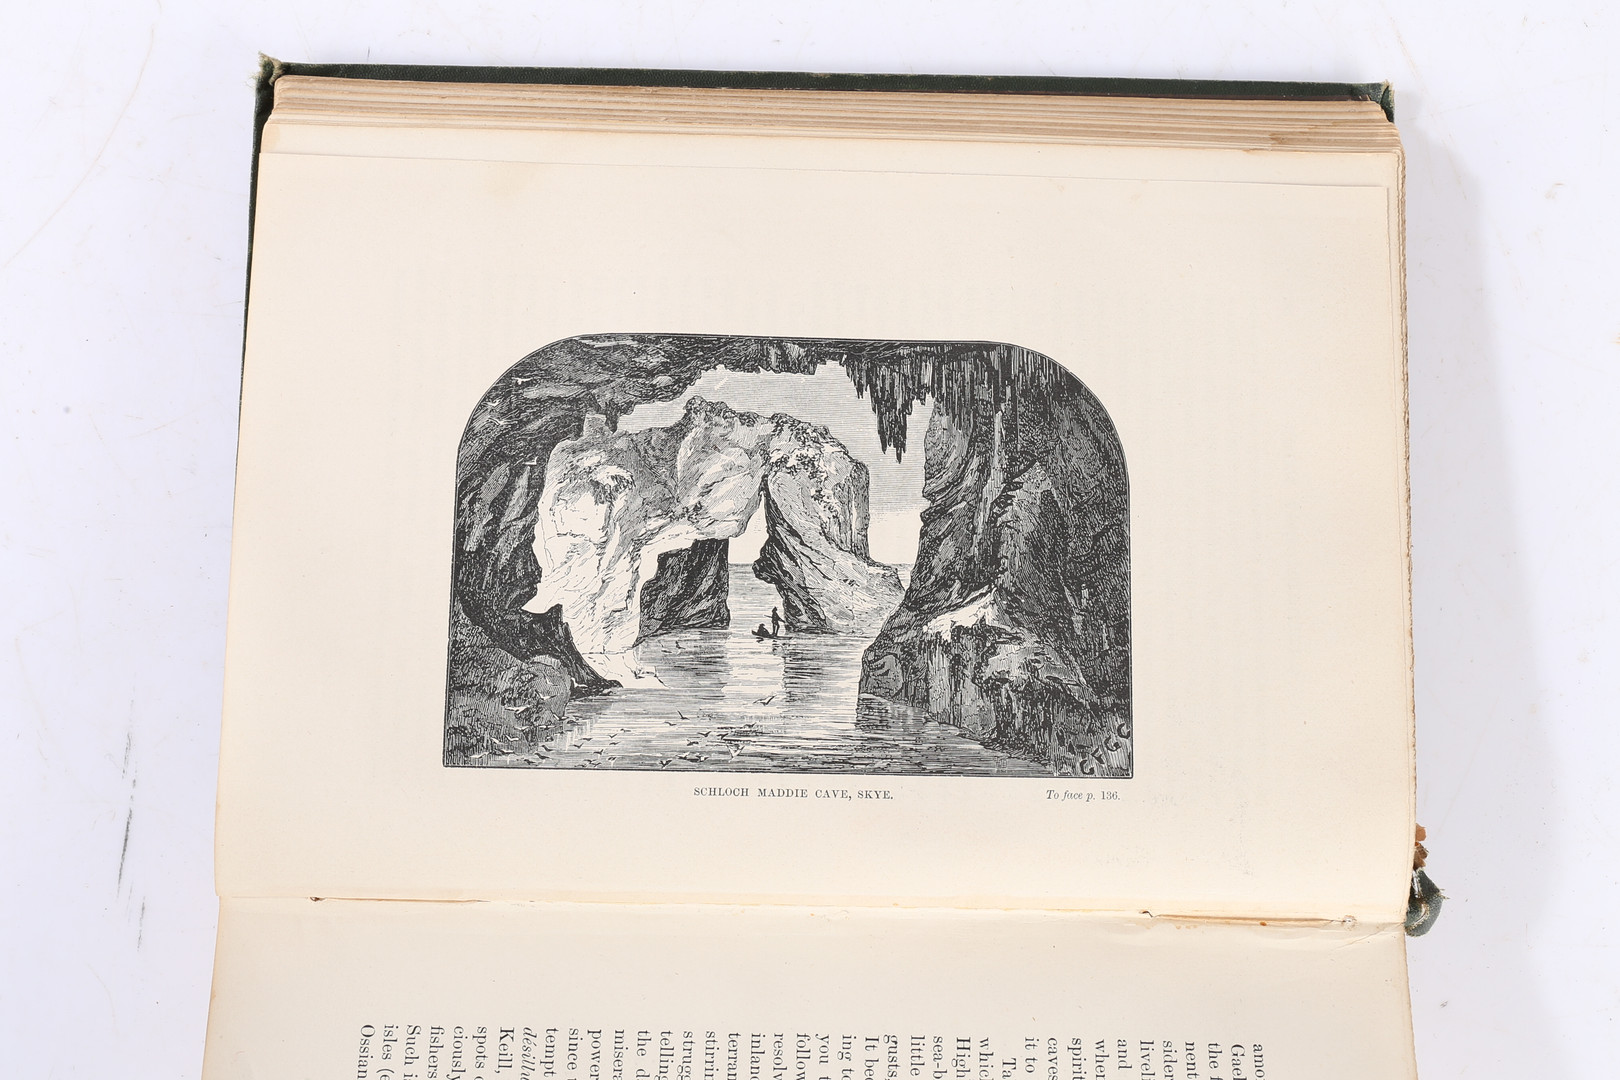 CONSTANCE F. GORDON CUMMING "FROM THE HEBRIDES TO THE HIMALAYAS" 1ST EDITION VOLUMES 1 & 2. - Image 7 of 13